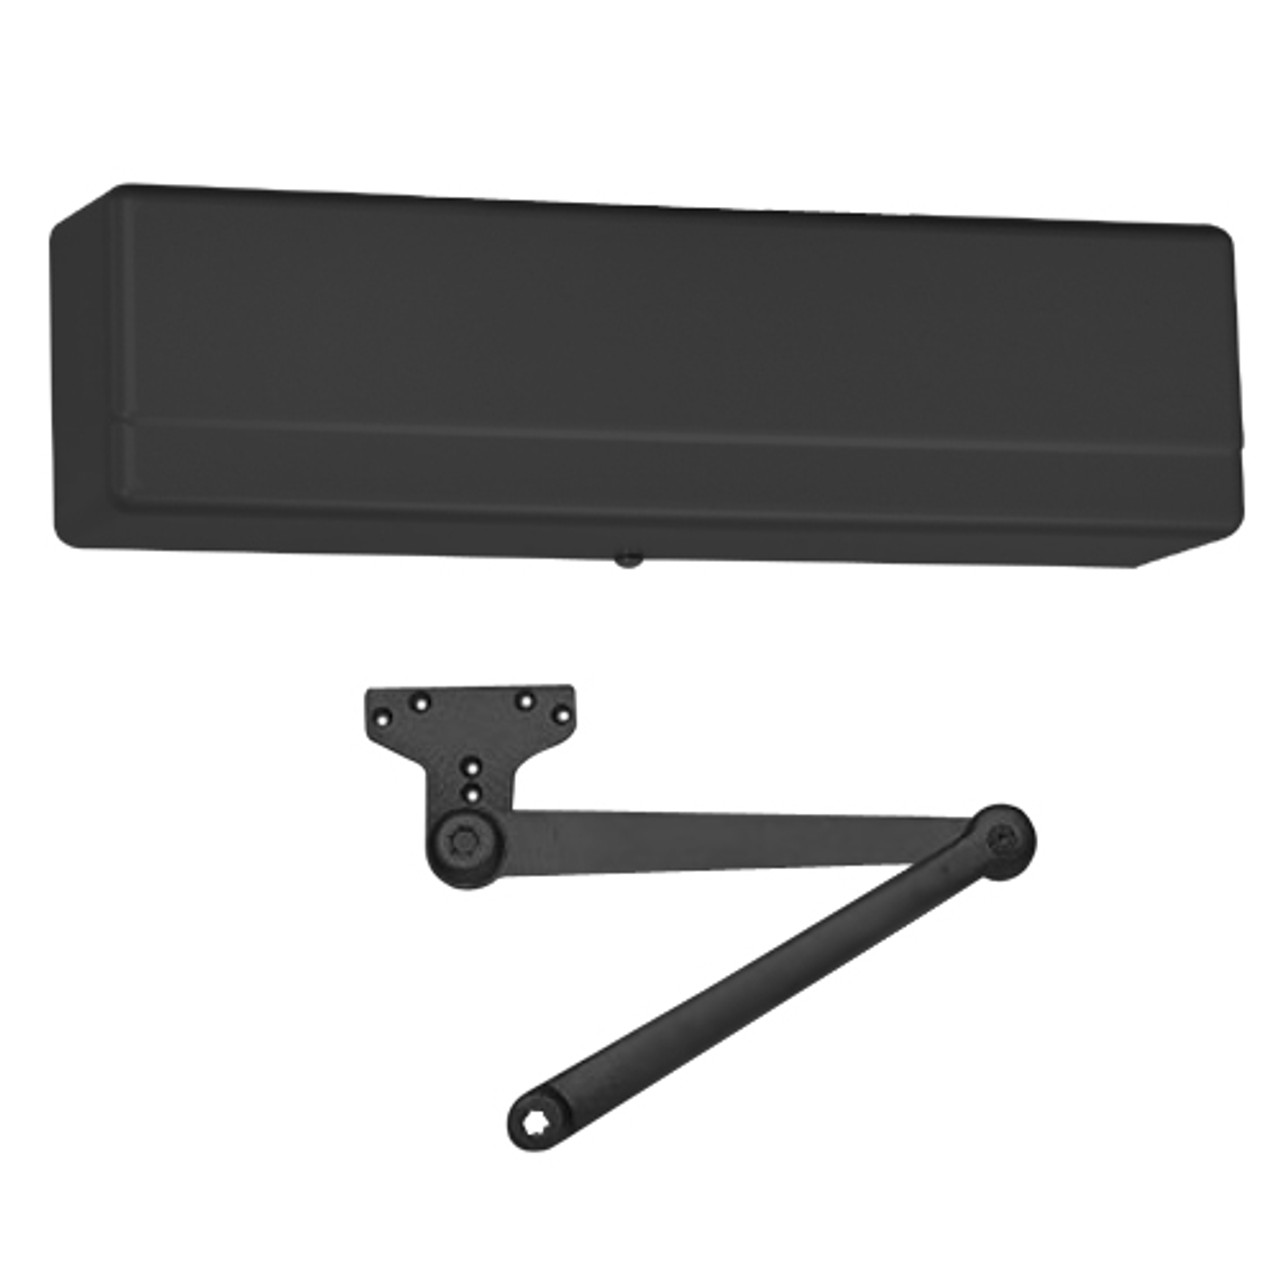 1431-P10-ED Sargent 1431 Series Powerglide Door Closer with P10 - Heavy Duty Parallel Arm in Black Powder Coat